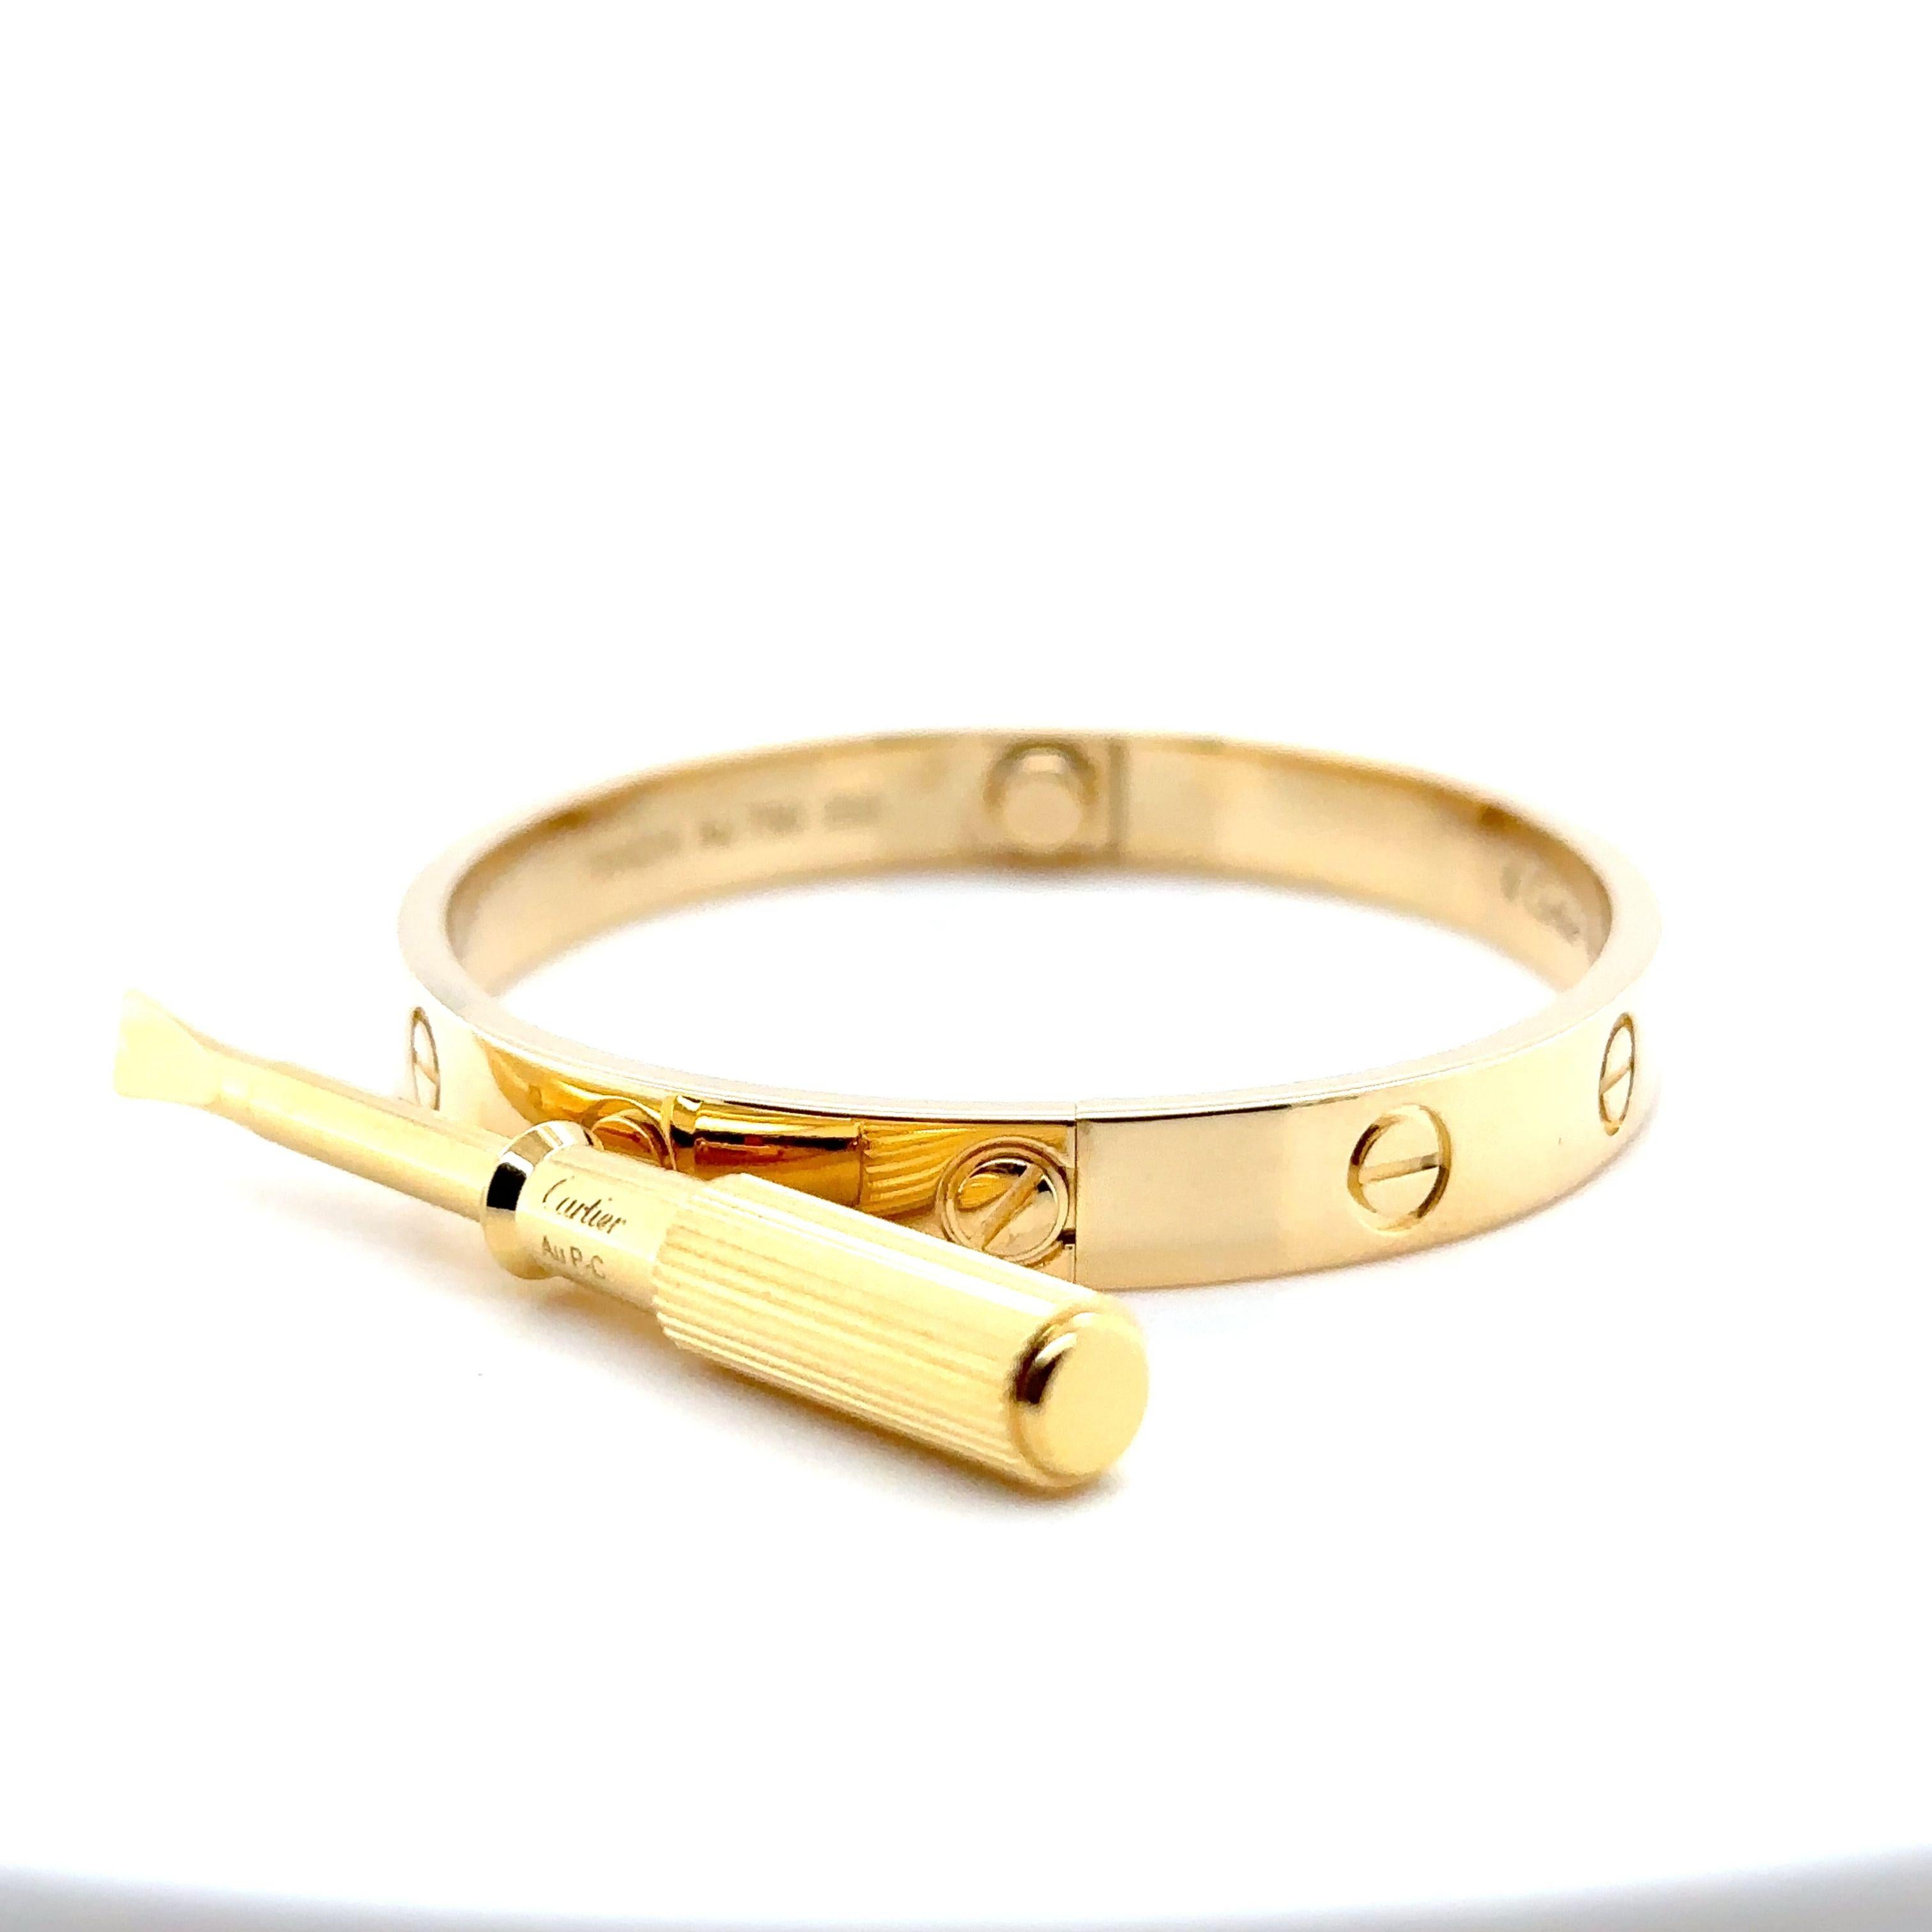 A Cartier 18ct Yellow Gold Love Bracelet.

Size 16cm, Width 6.1mm  Serial Number - TSR024.

Metal: 18ct Yellow Gold
Carat: N/A
Colour: N/A
Clarity:  N/A
Cut: N/A
Weight: 30.37 grams
Engravings/Markings: Cartier 16 TSR024 Au 750